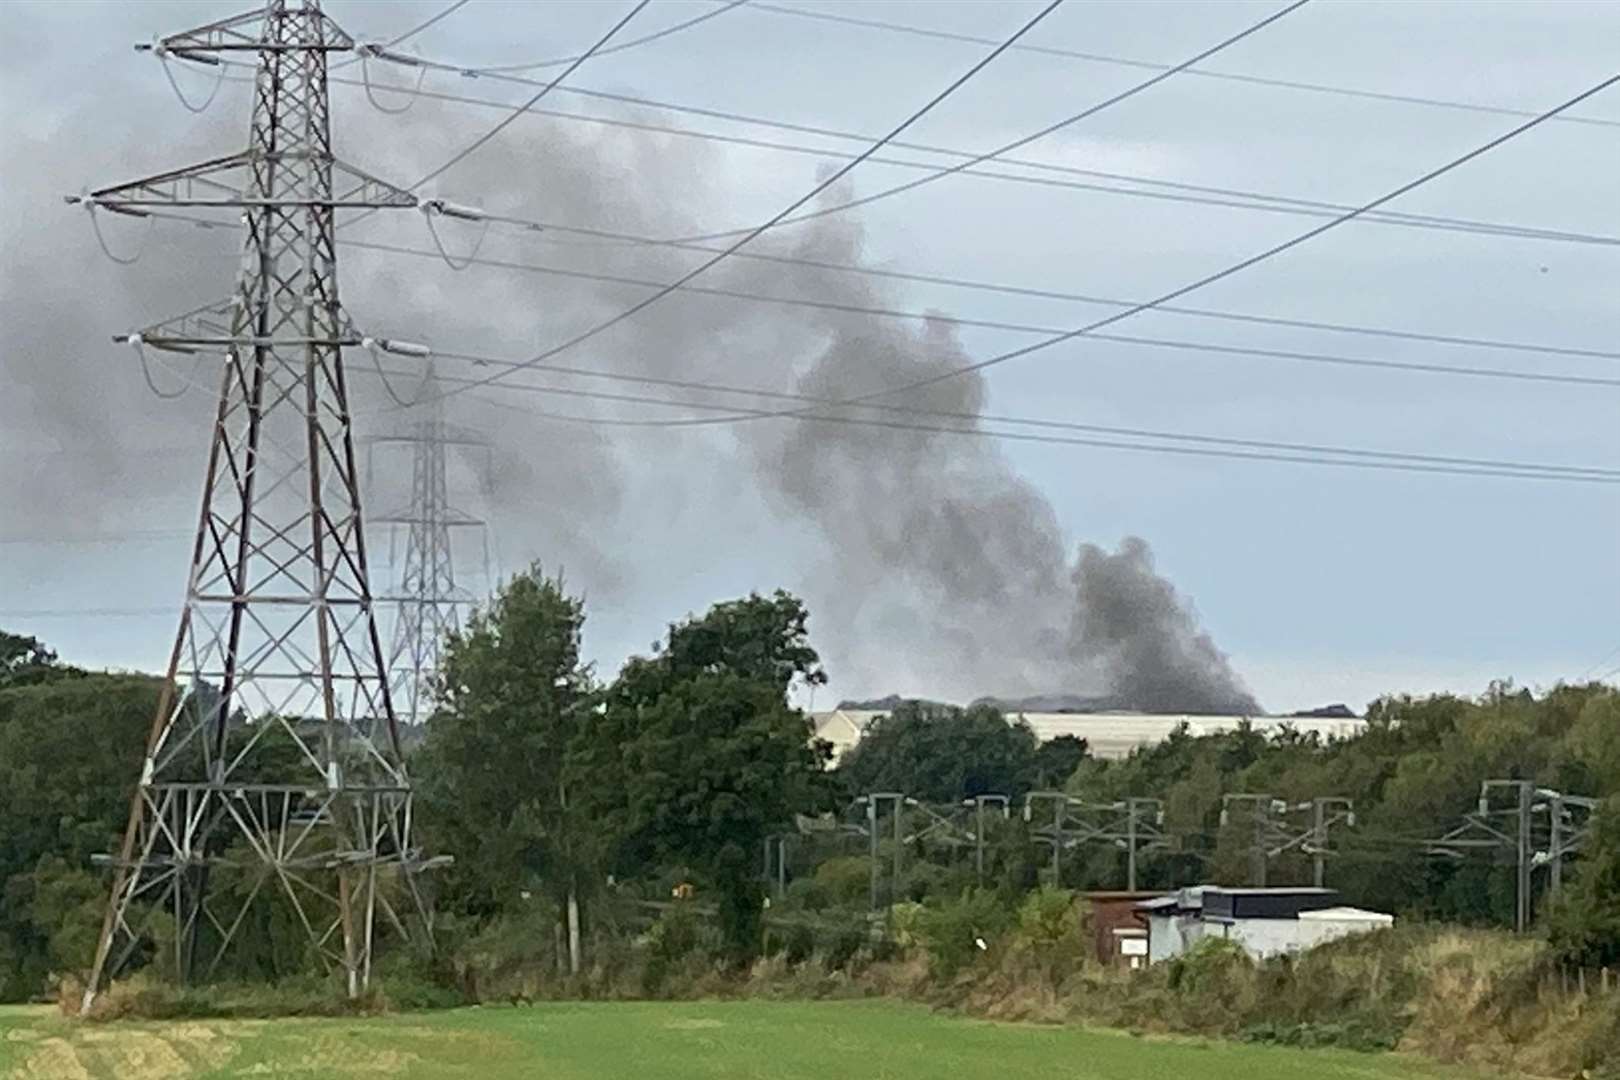 Smoke could be seen billowing from the site. Photo: Barry Goodwin